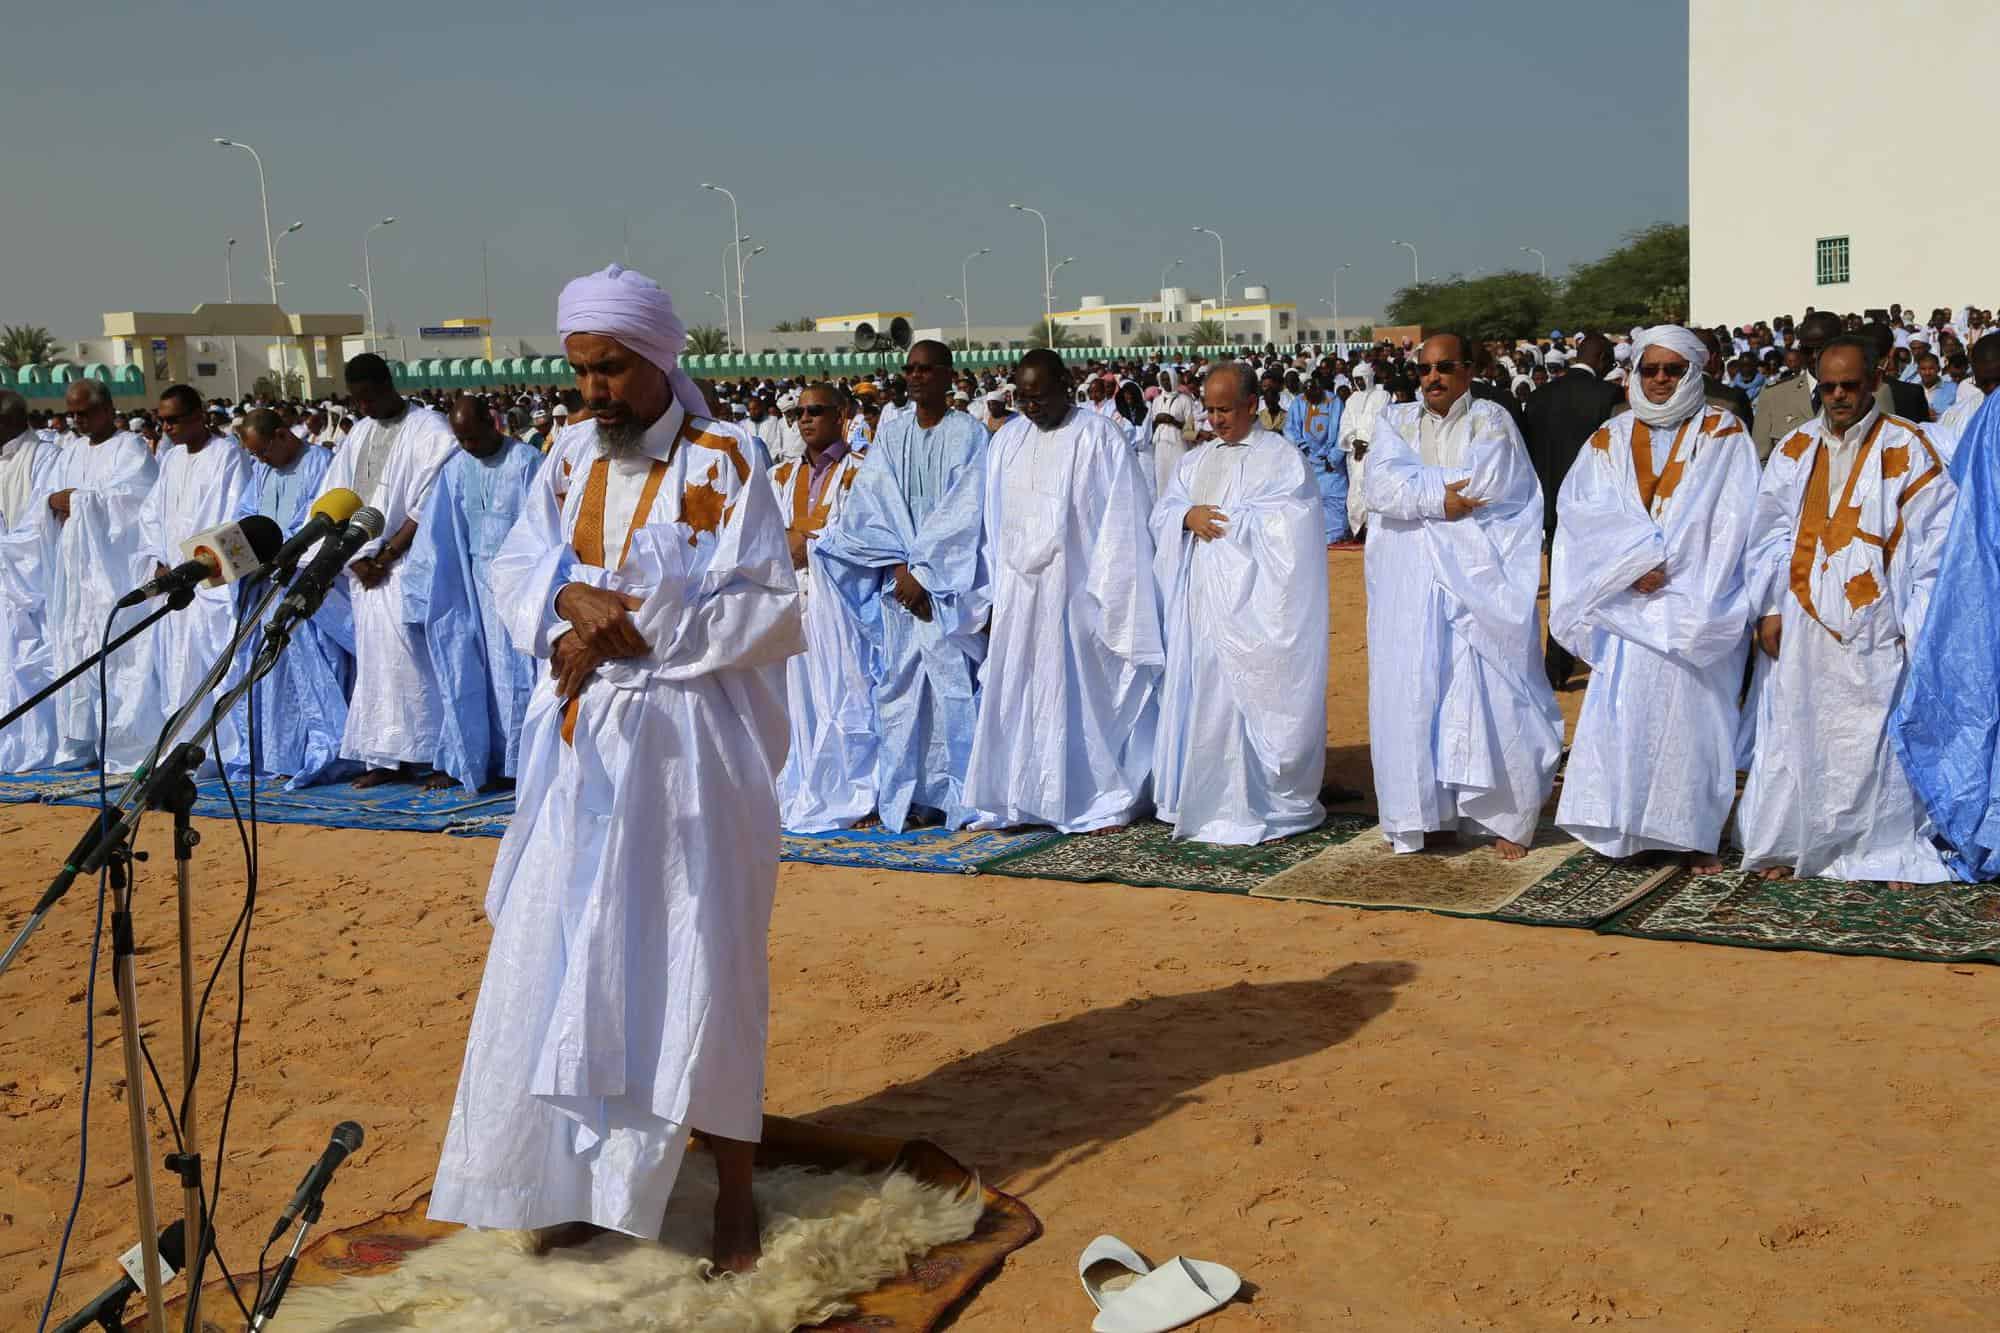 One of the customs of the Mauritanians in Ramadan